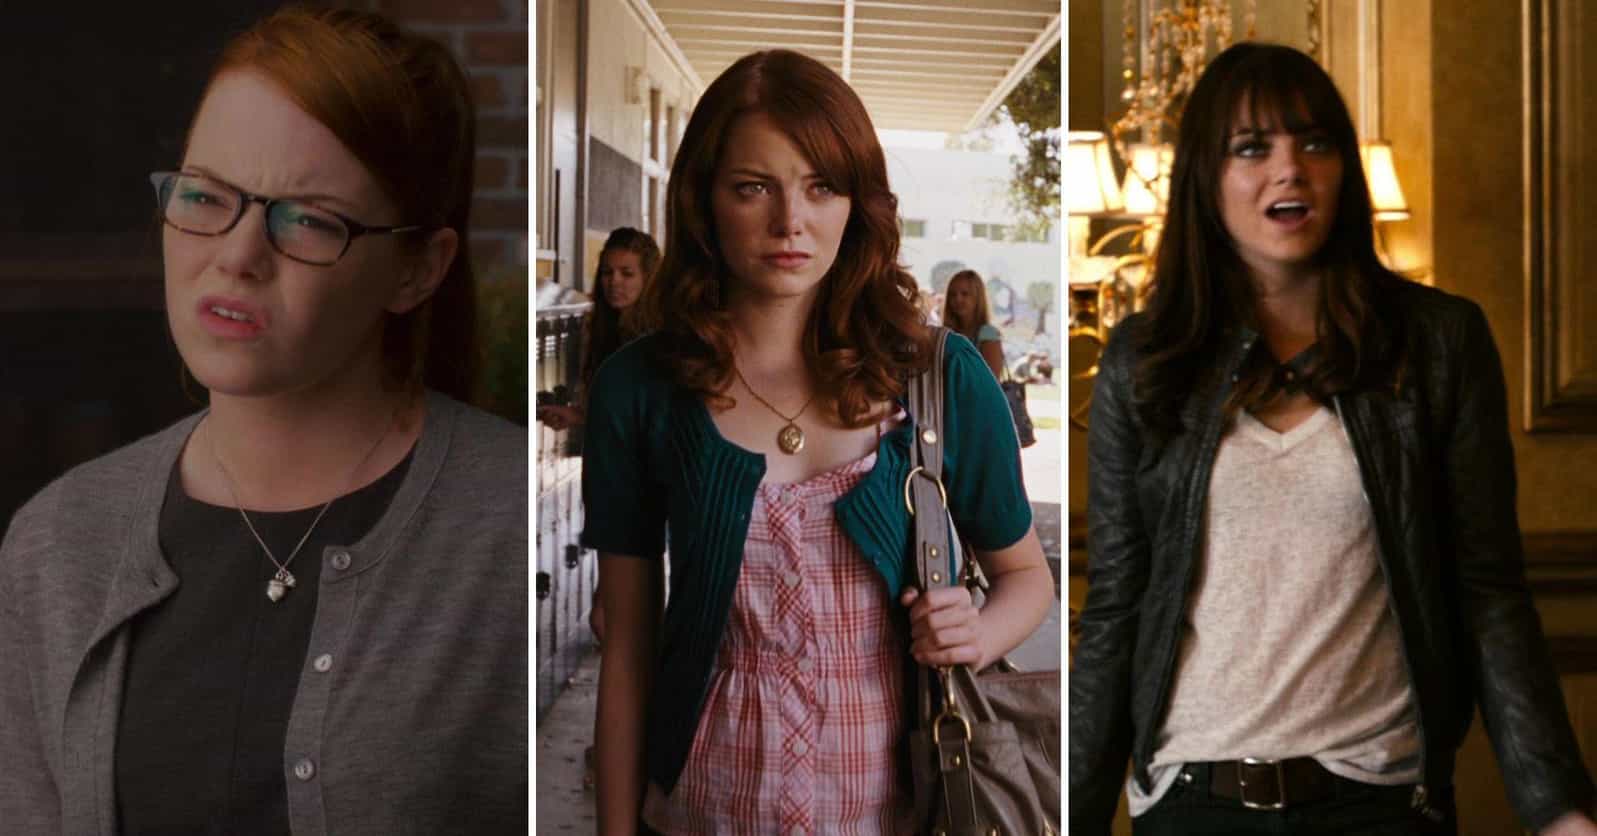 The Best Emma Stone Movies, Ranked By Her Undeniable Star Power